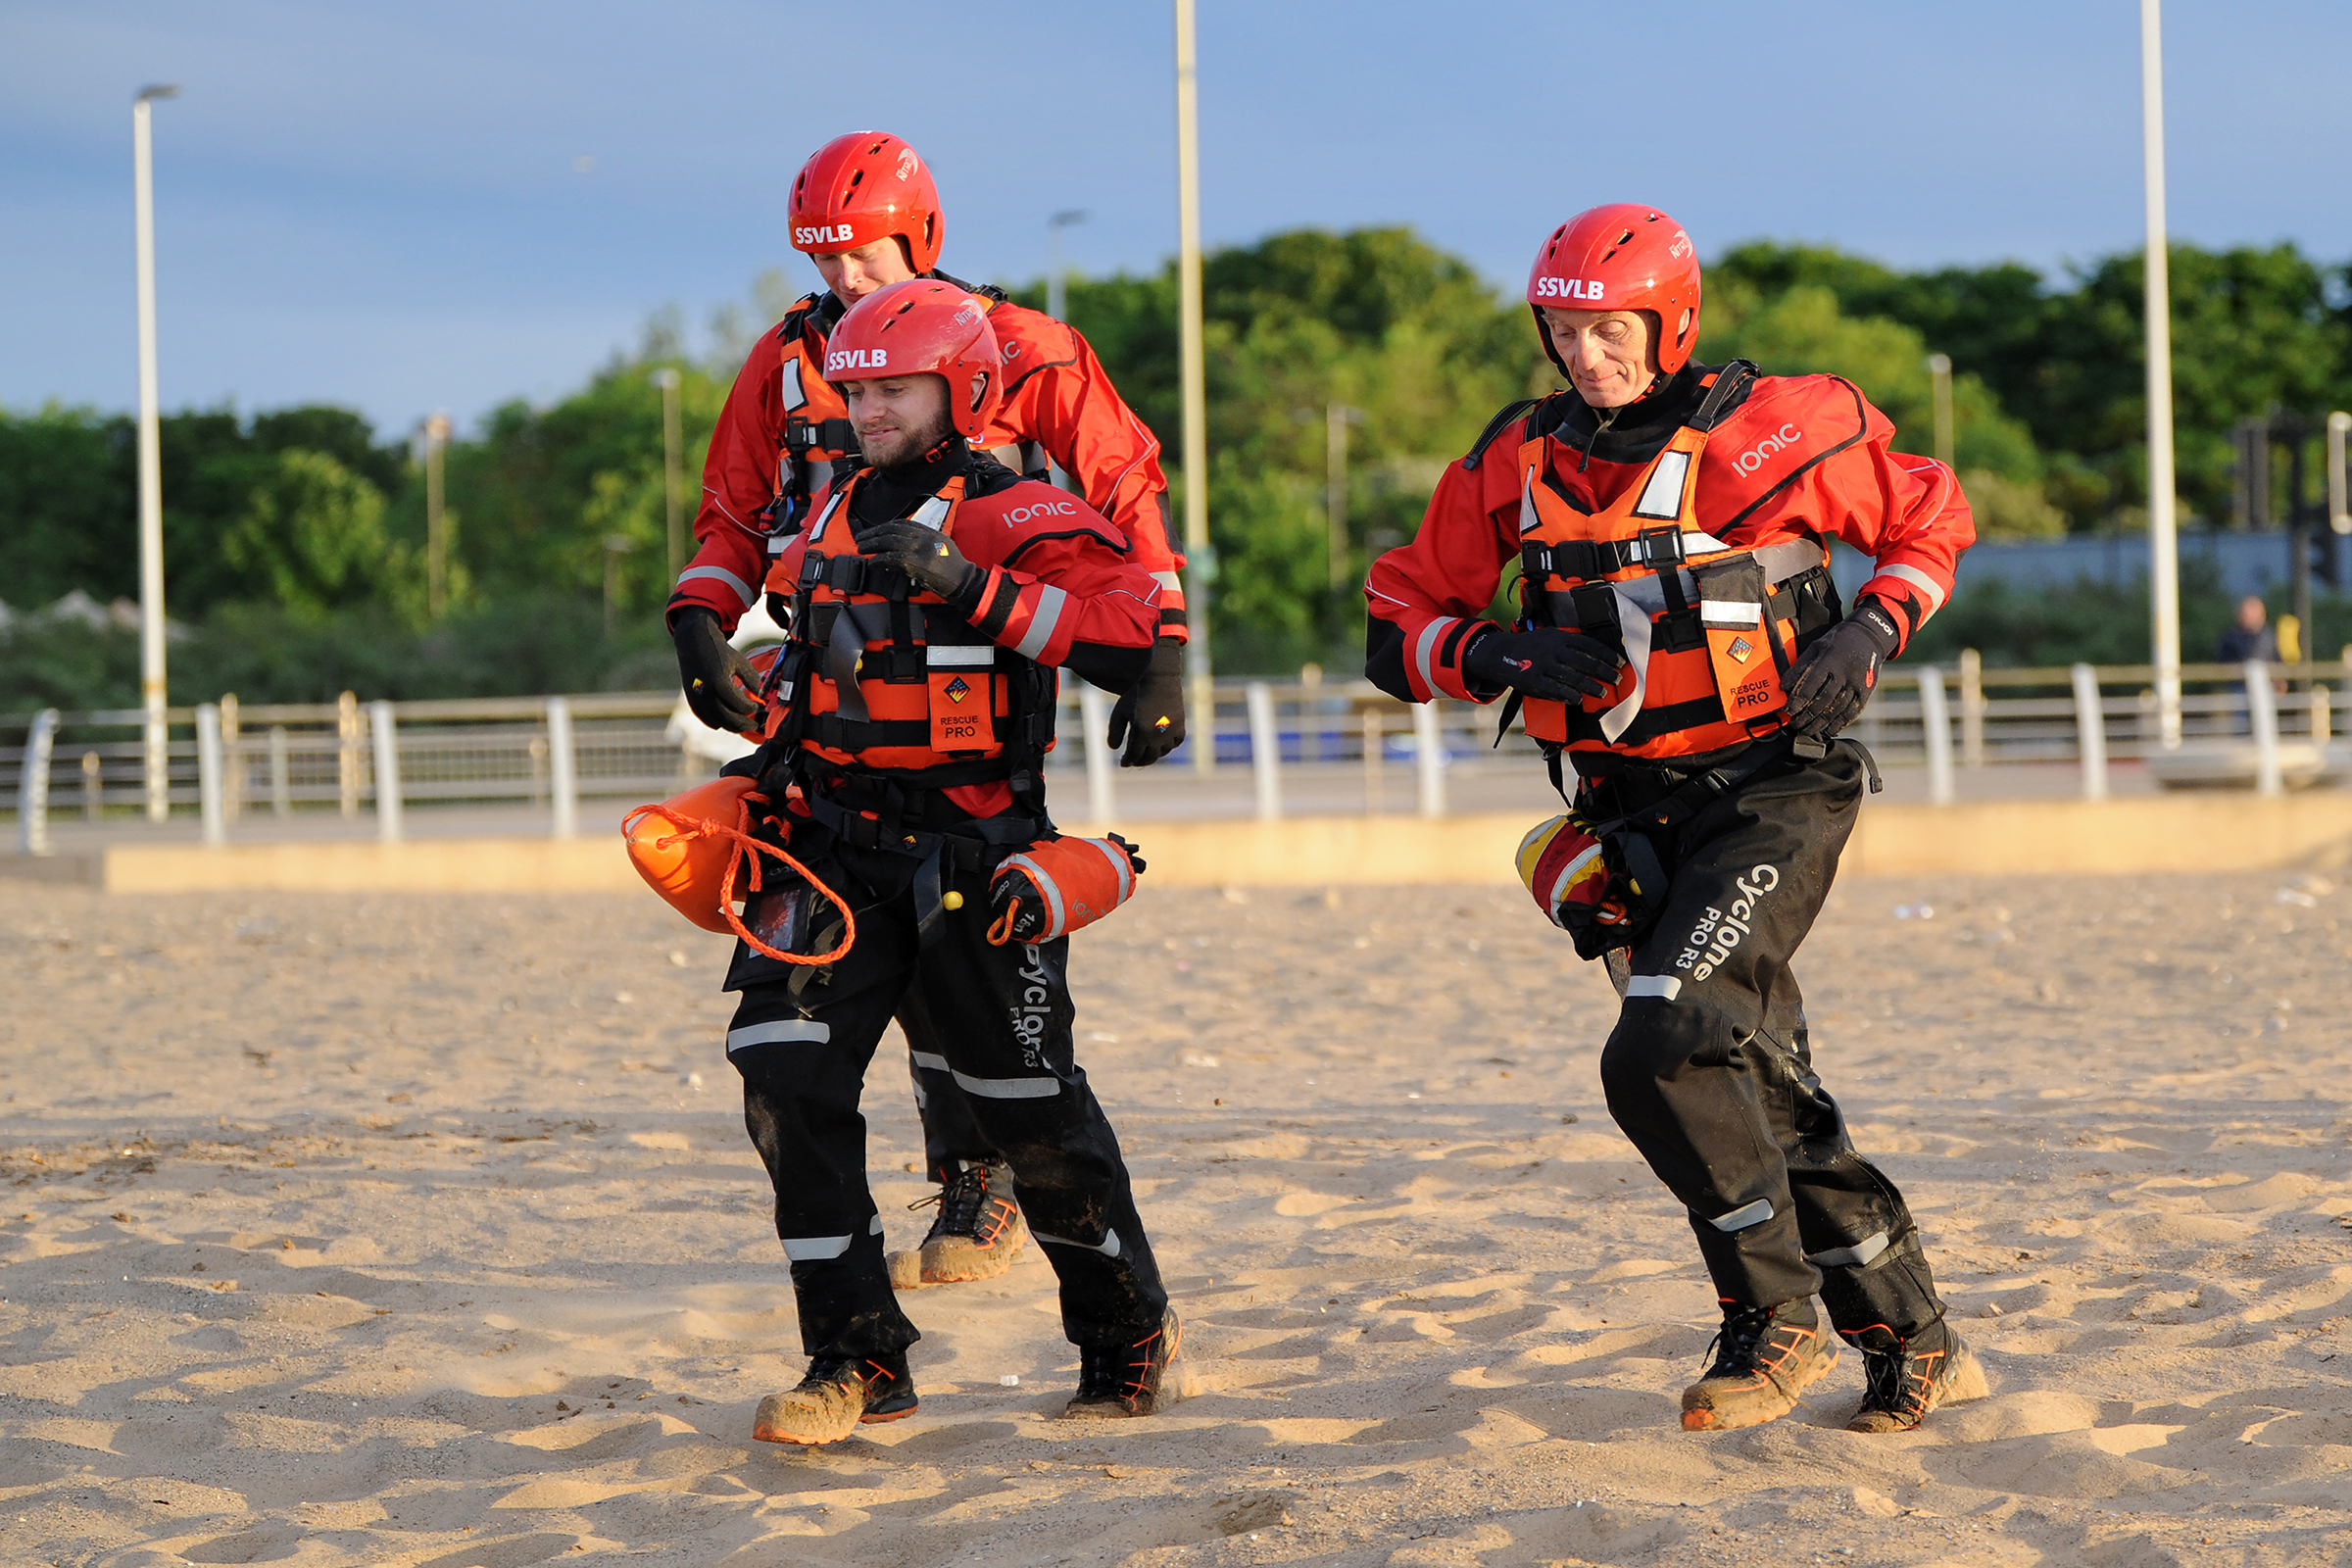 South Shields Volunteer Lifebrigade (SSVLB) - water rescue training at Littlehaven, South Shields.